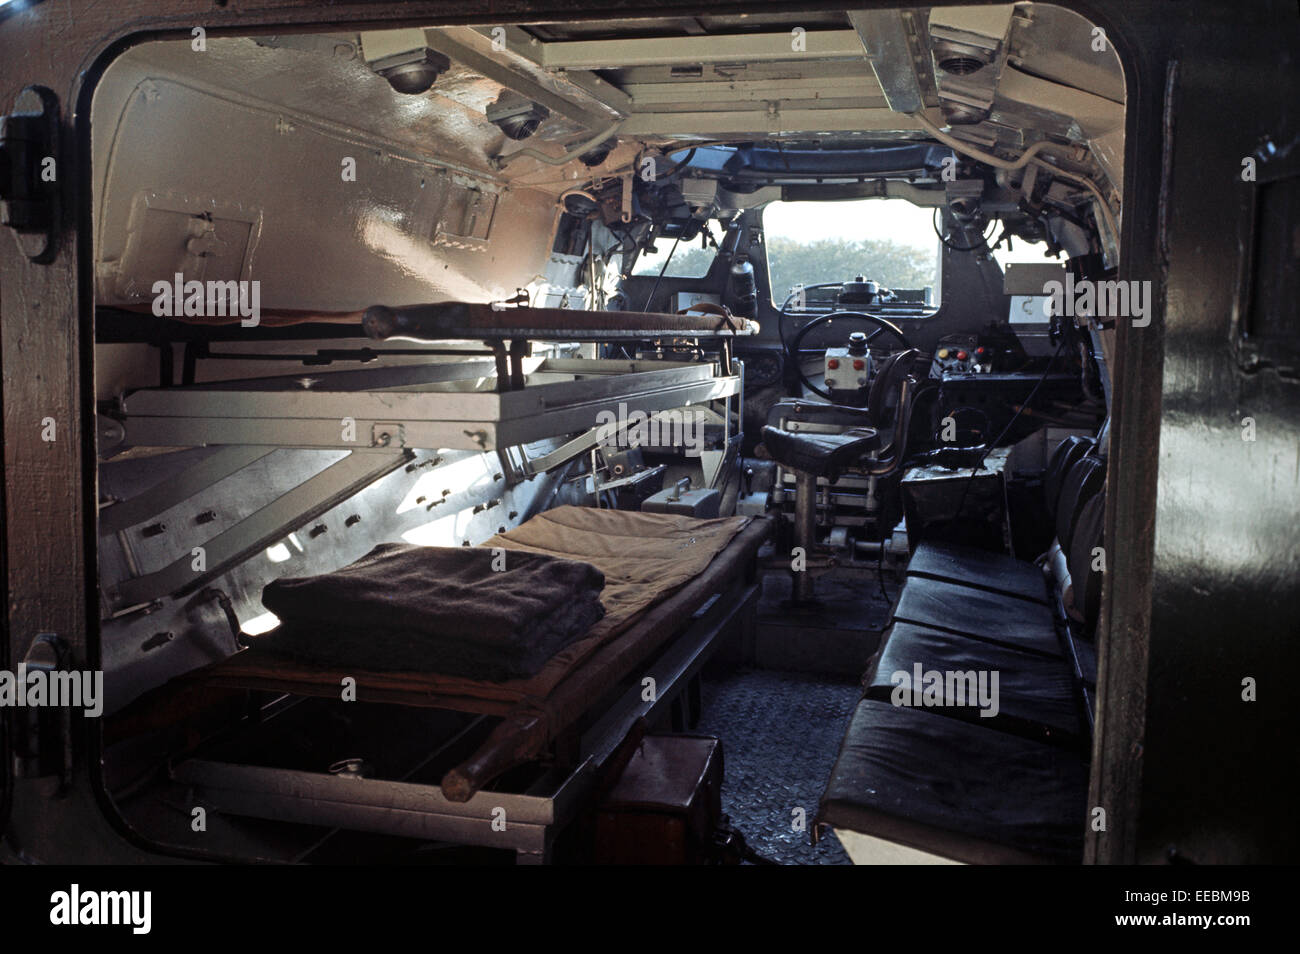 WEAPONS OF ULSTER - FEBRUARY 1972. Interior of British Army Saracen Ambulance during The Troubles, Northern Ireland. Stock Photo